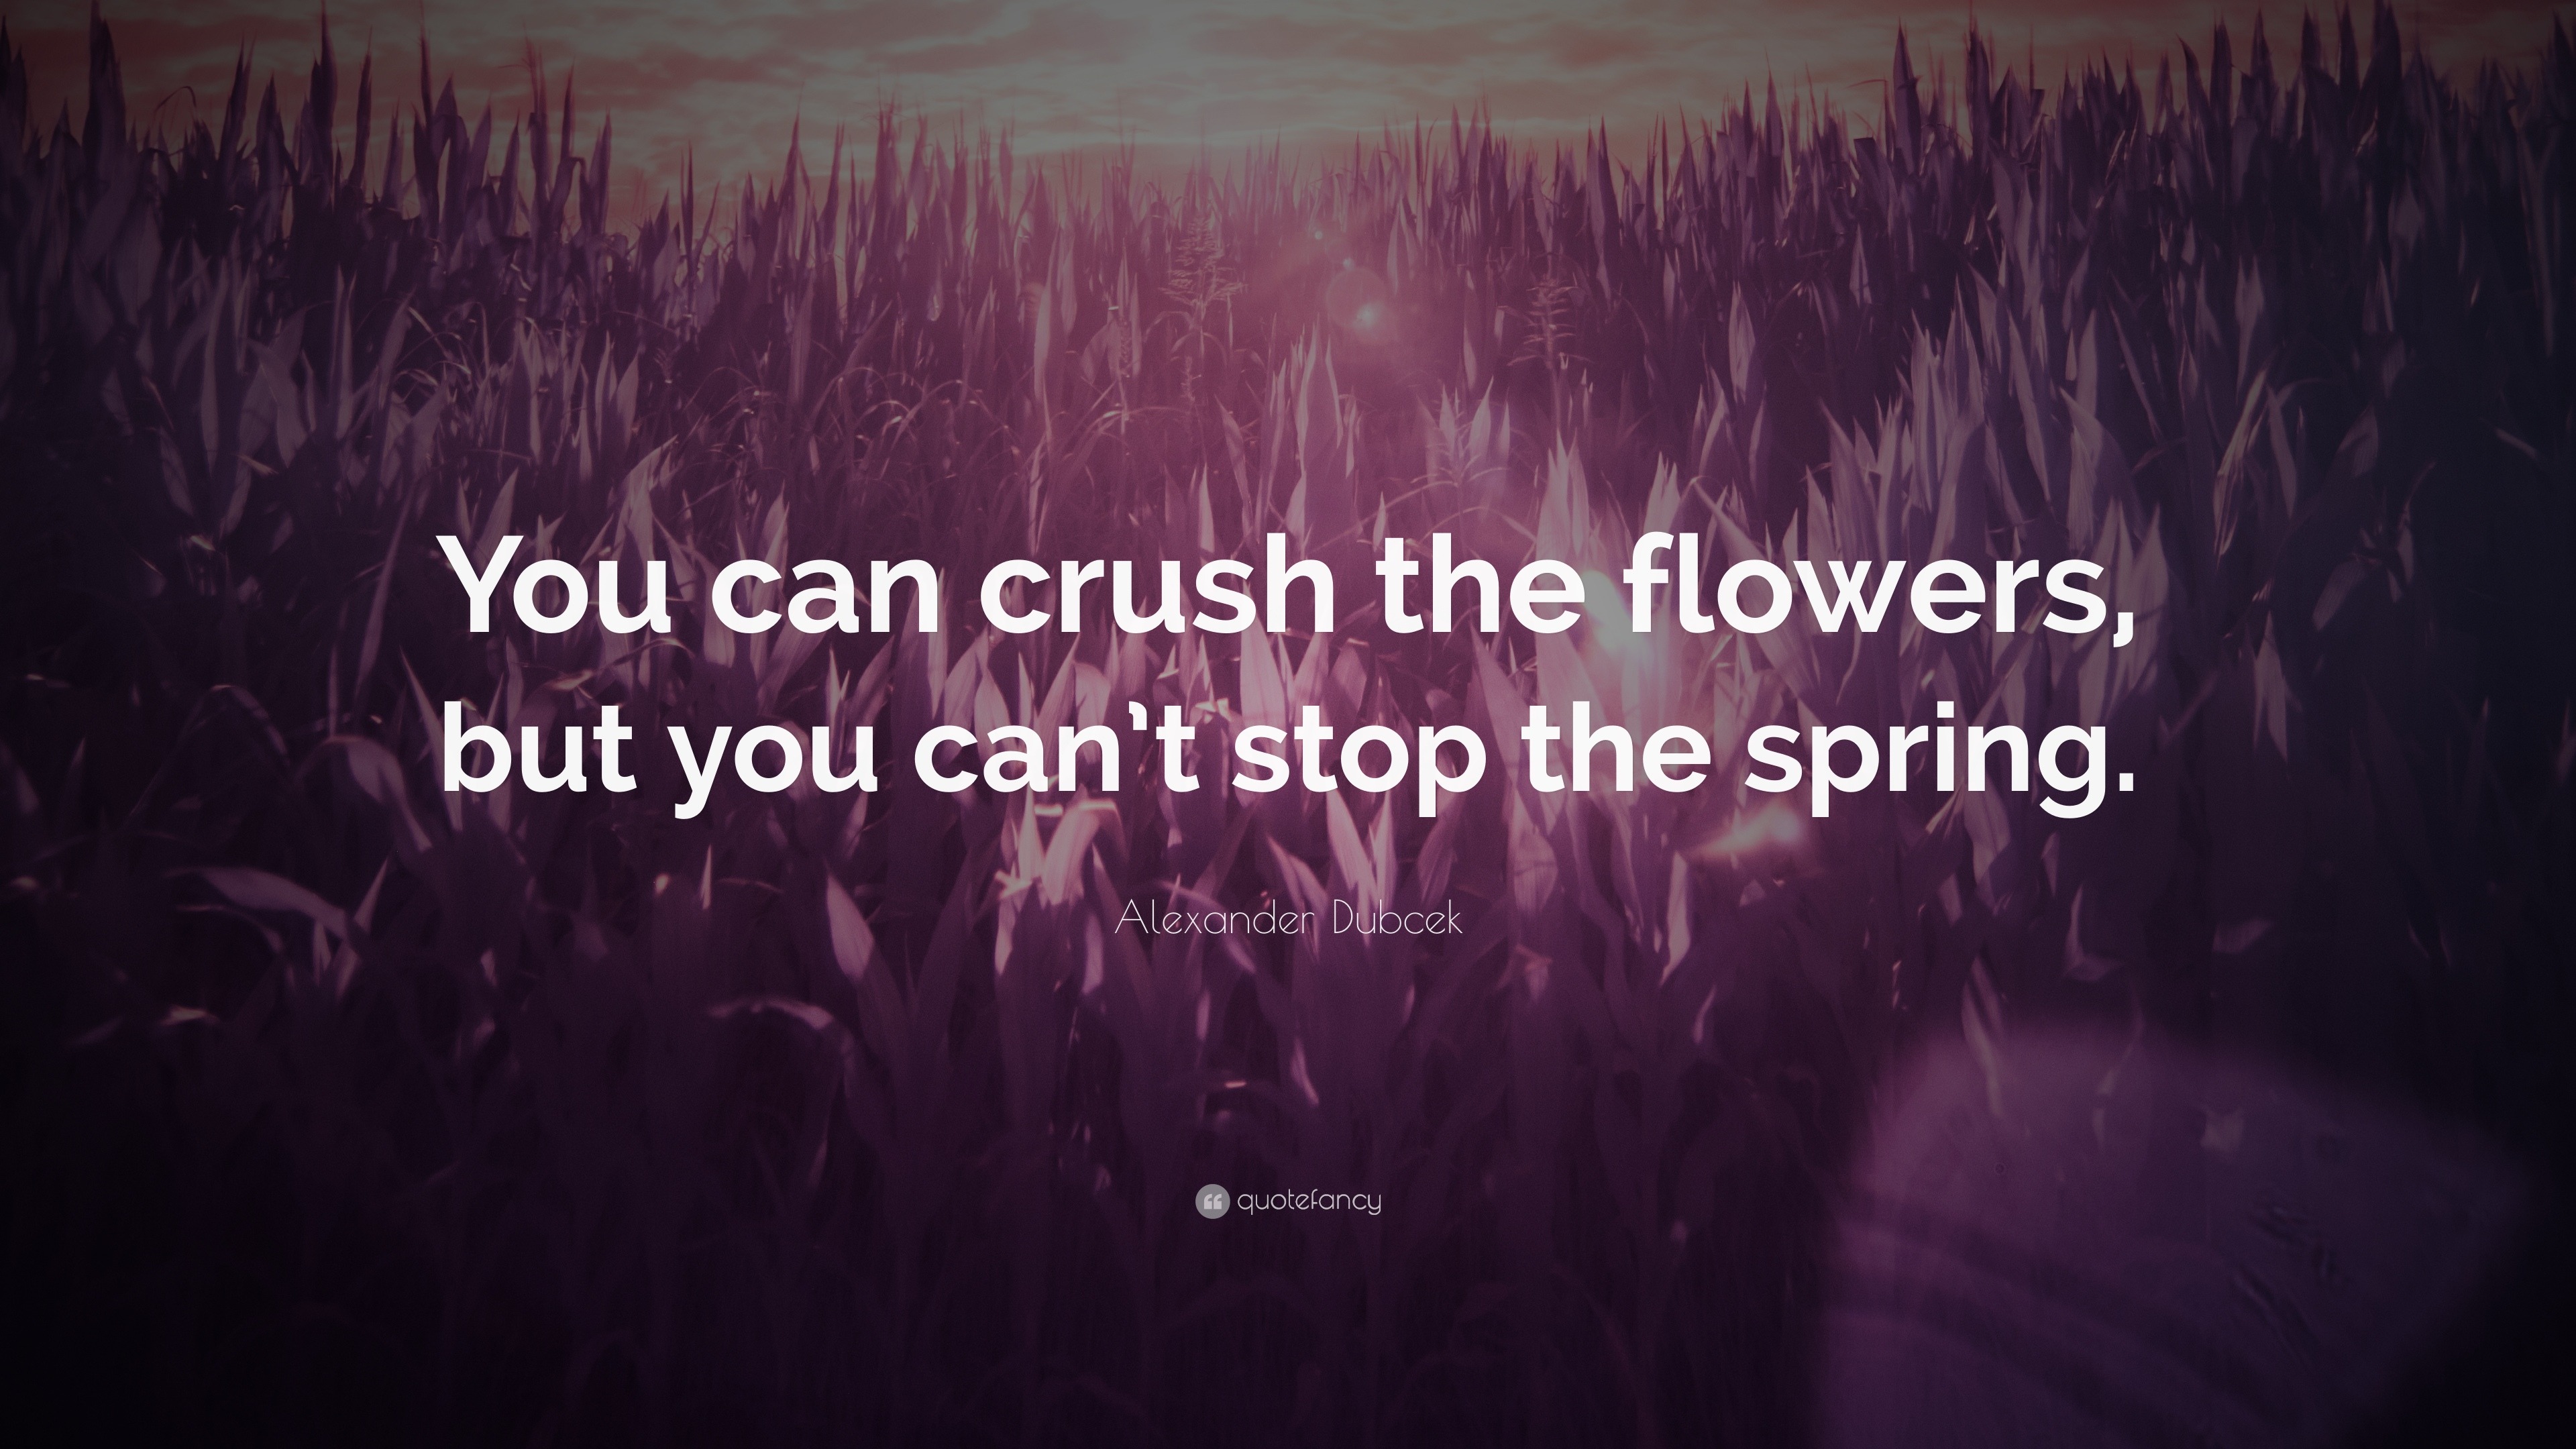 They could crush all the flowers, but they couldn't delay spring - Khatt  Foundation